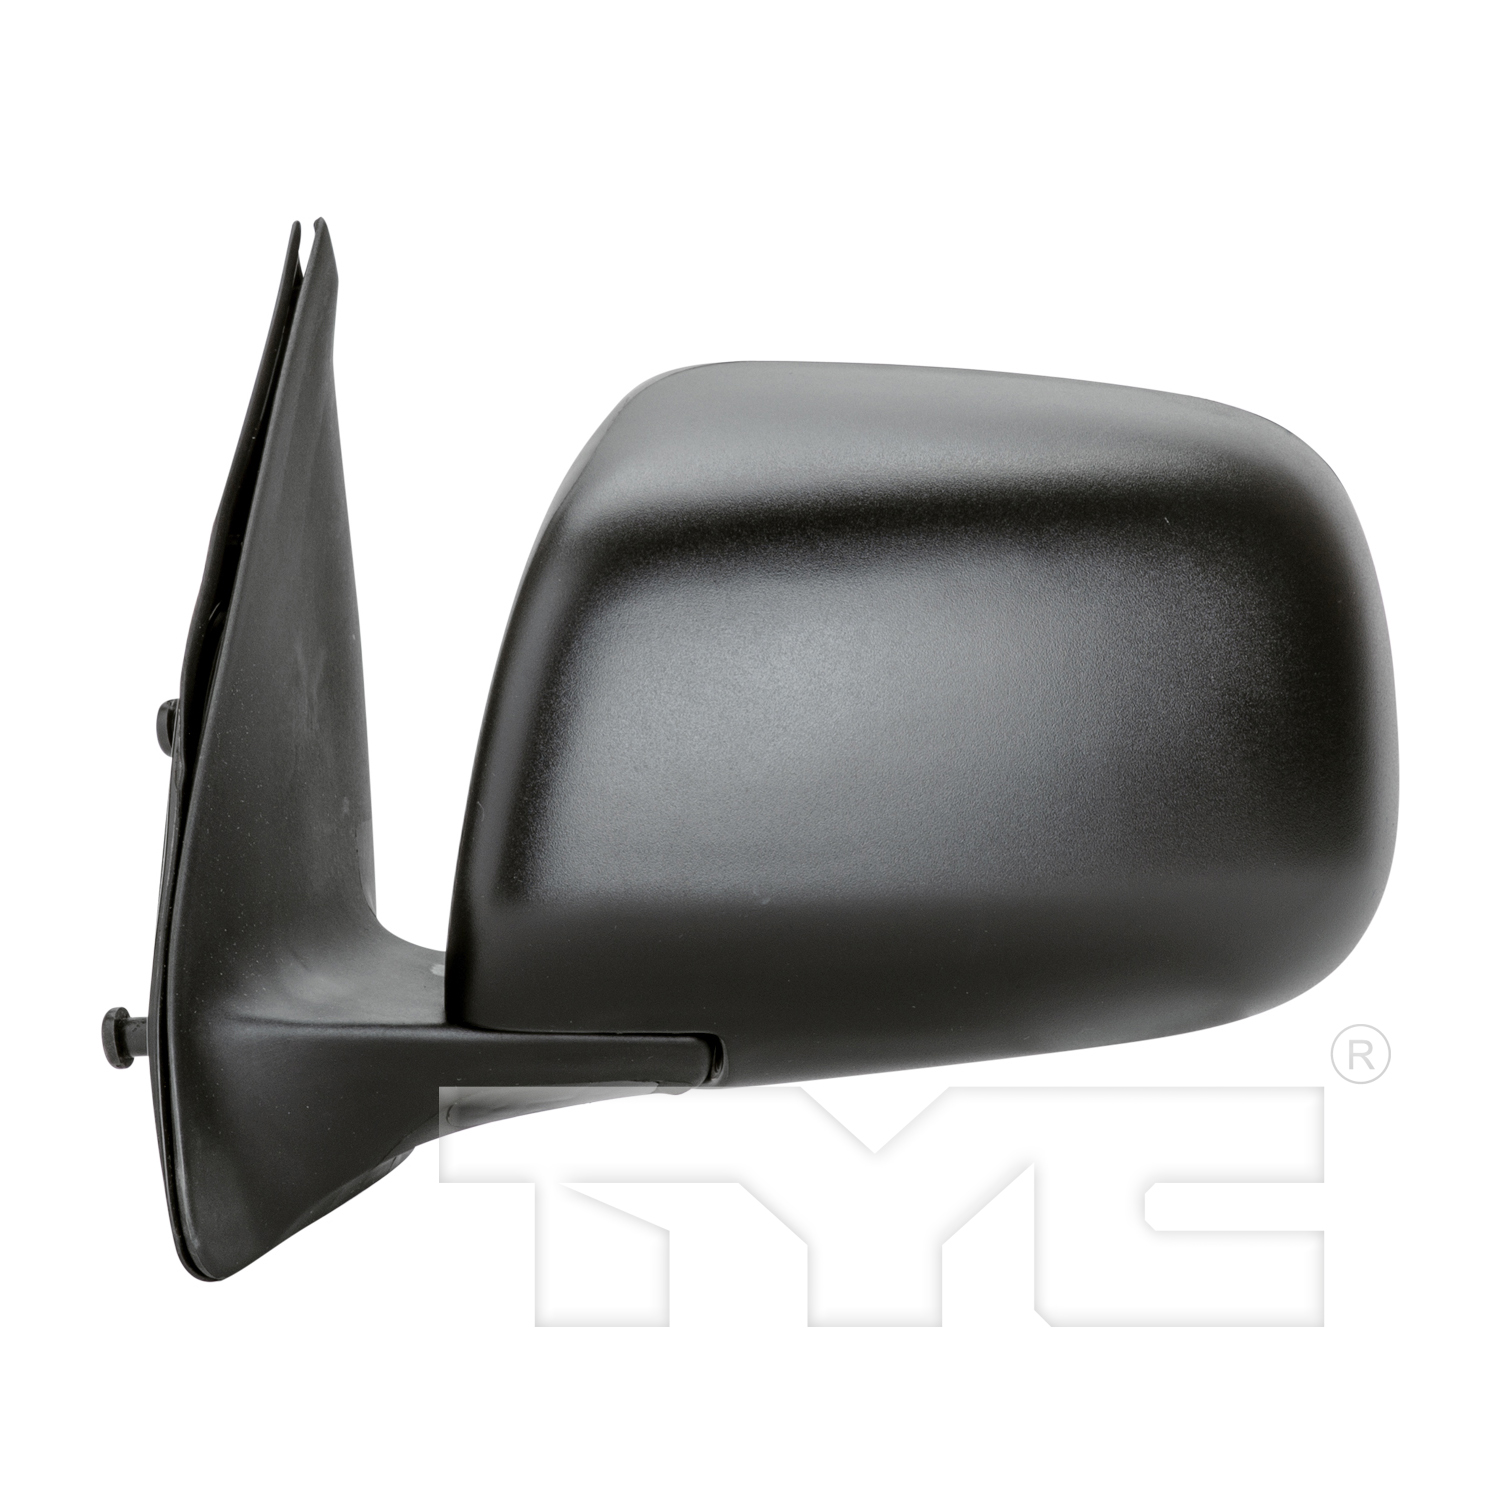 Aftermarket MIRRORS for TOYOTA - TACOMA, TACOMA,05-11,LT Mirror outside rear view